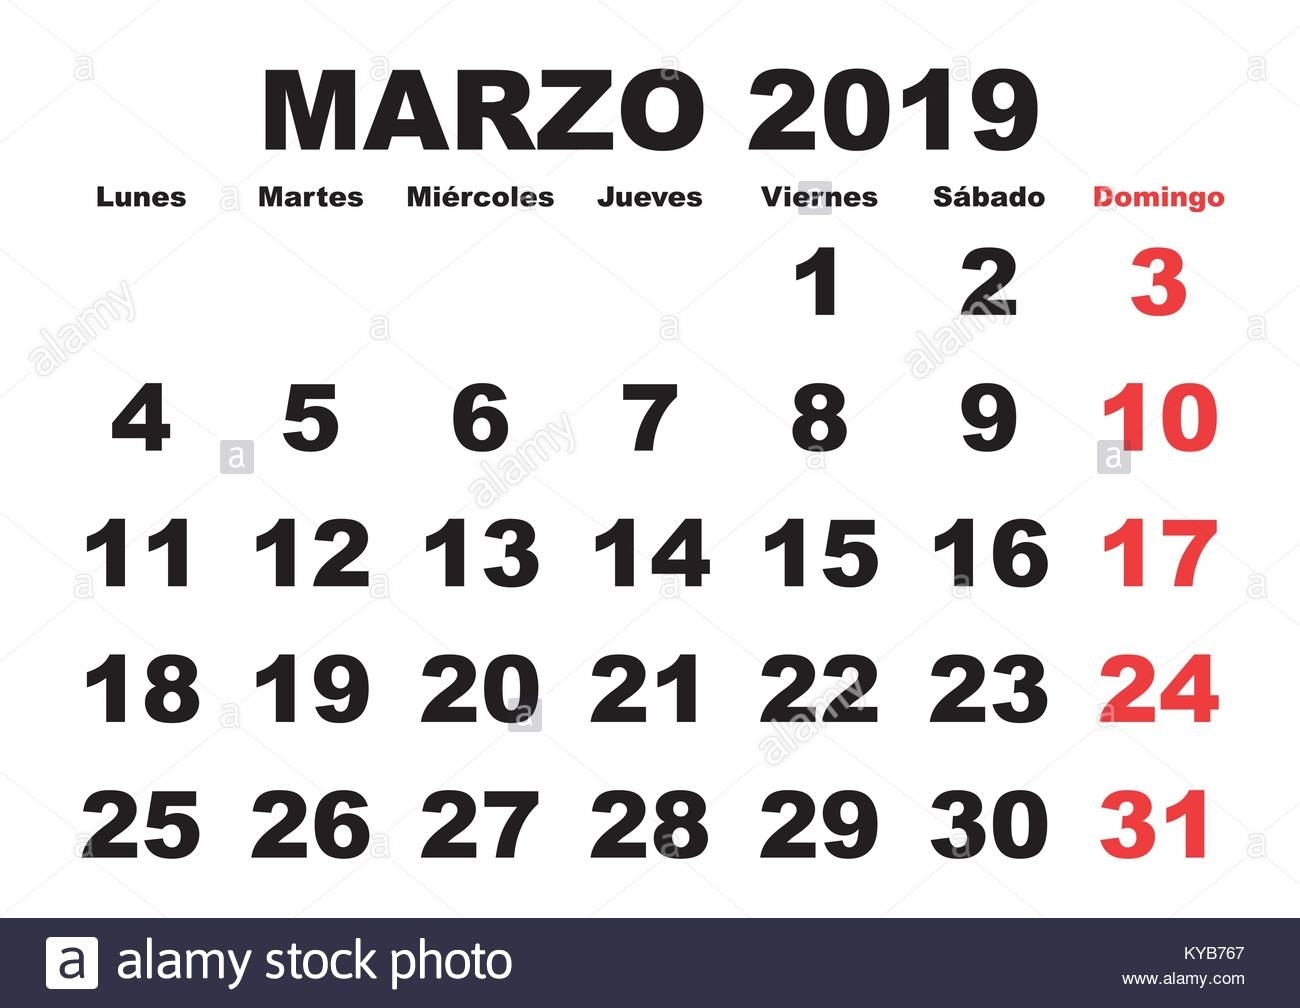 March Month In A Year 2019 Wall Calendar In Spanish. Marzo 2019 Calendar Month In Spanish